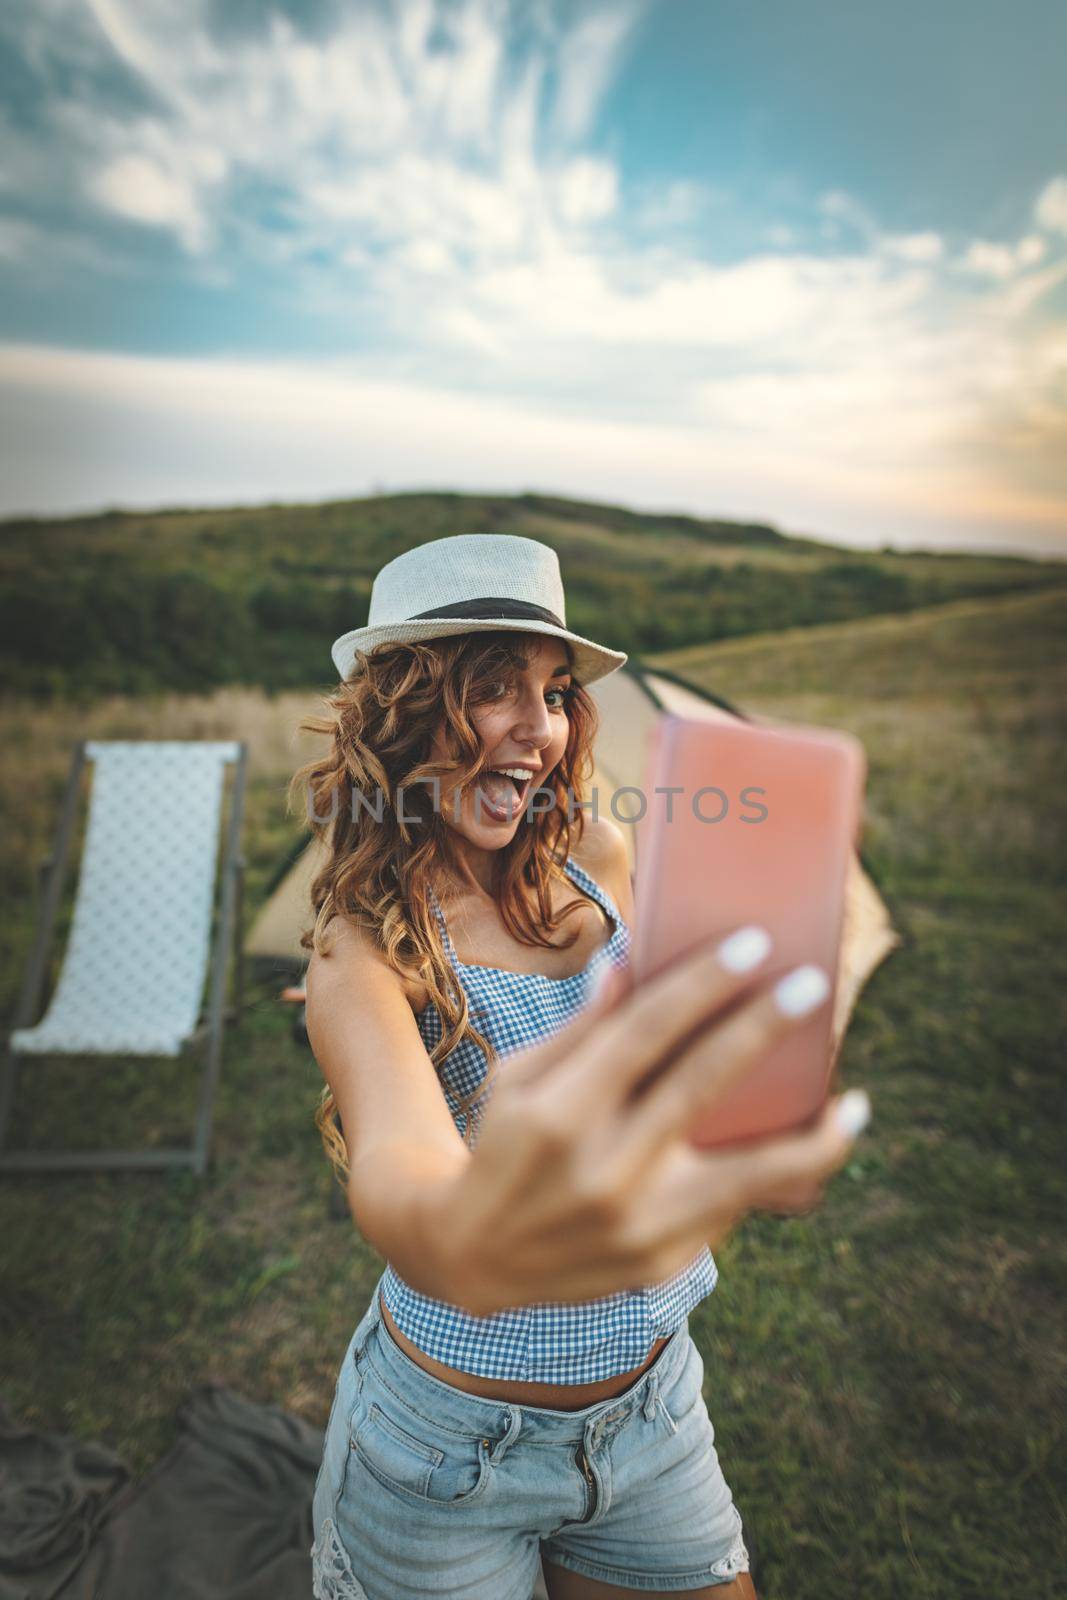 Happy young woman enjoys a nice day in nature. She's smiling and taking selfie with smartphone.